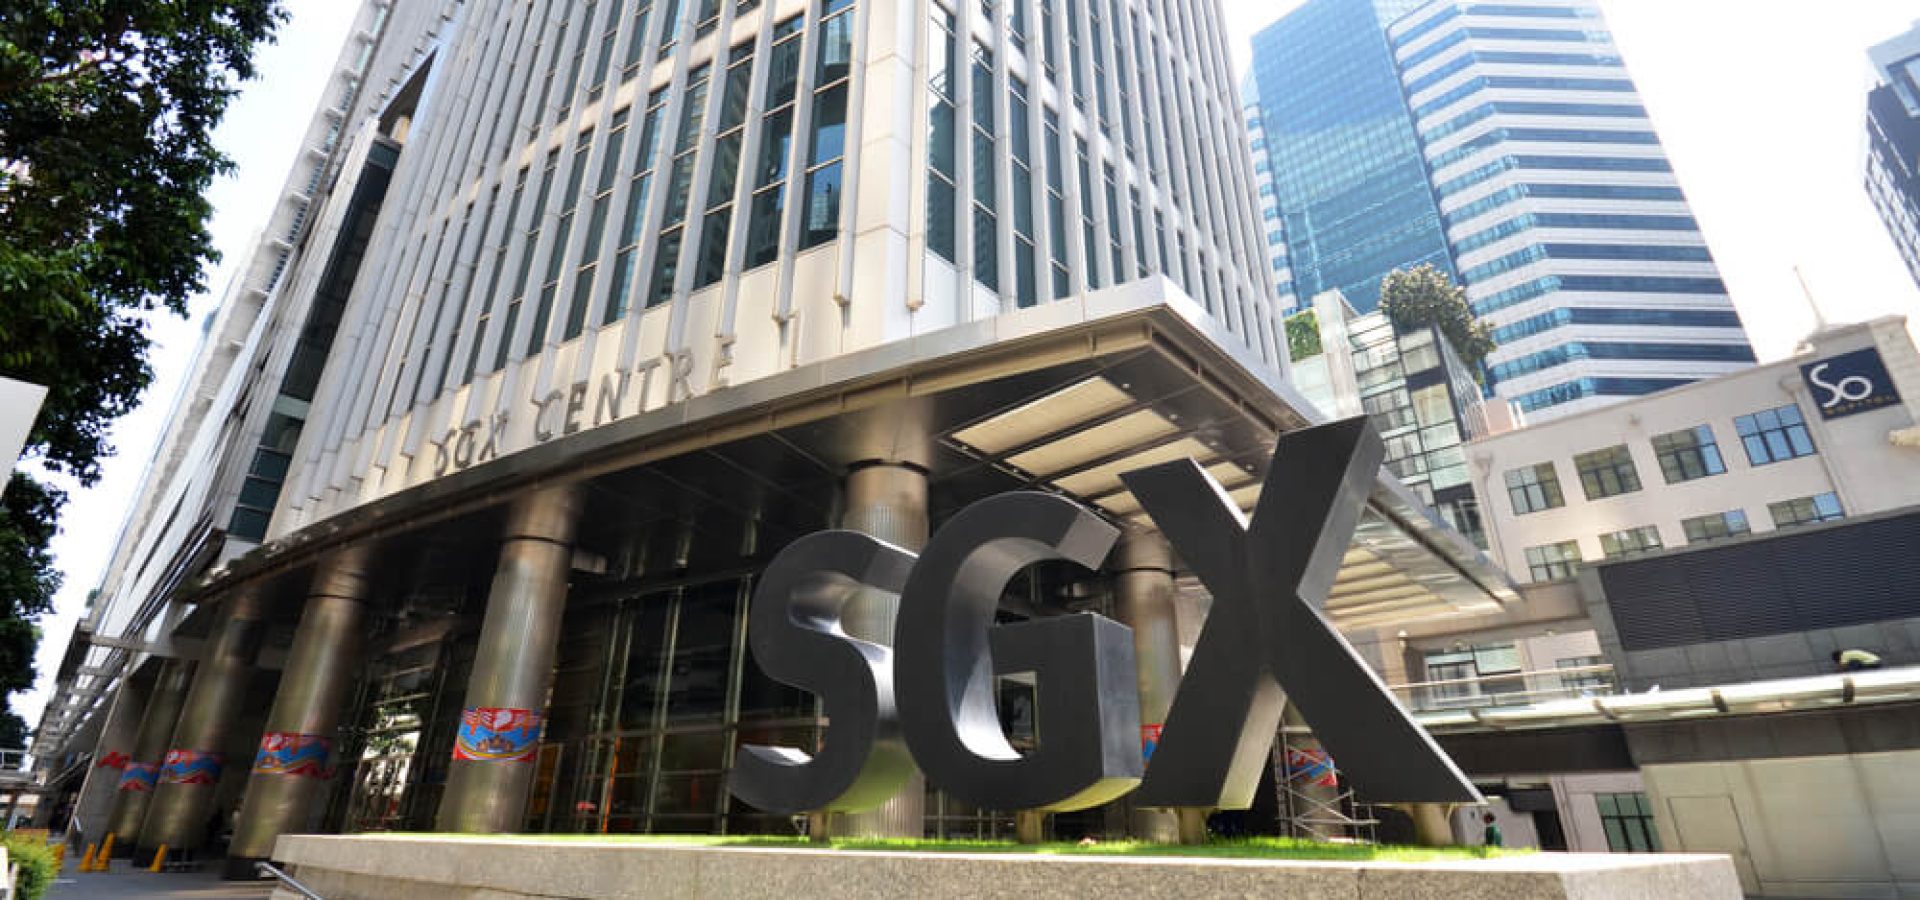 Singapore SGX Centre is a twin tower high-rise complex in the city of Singapore.